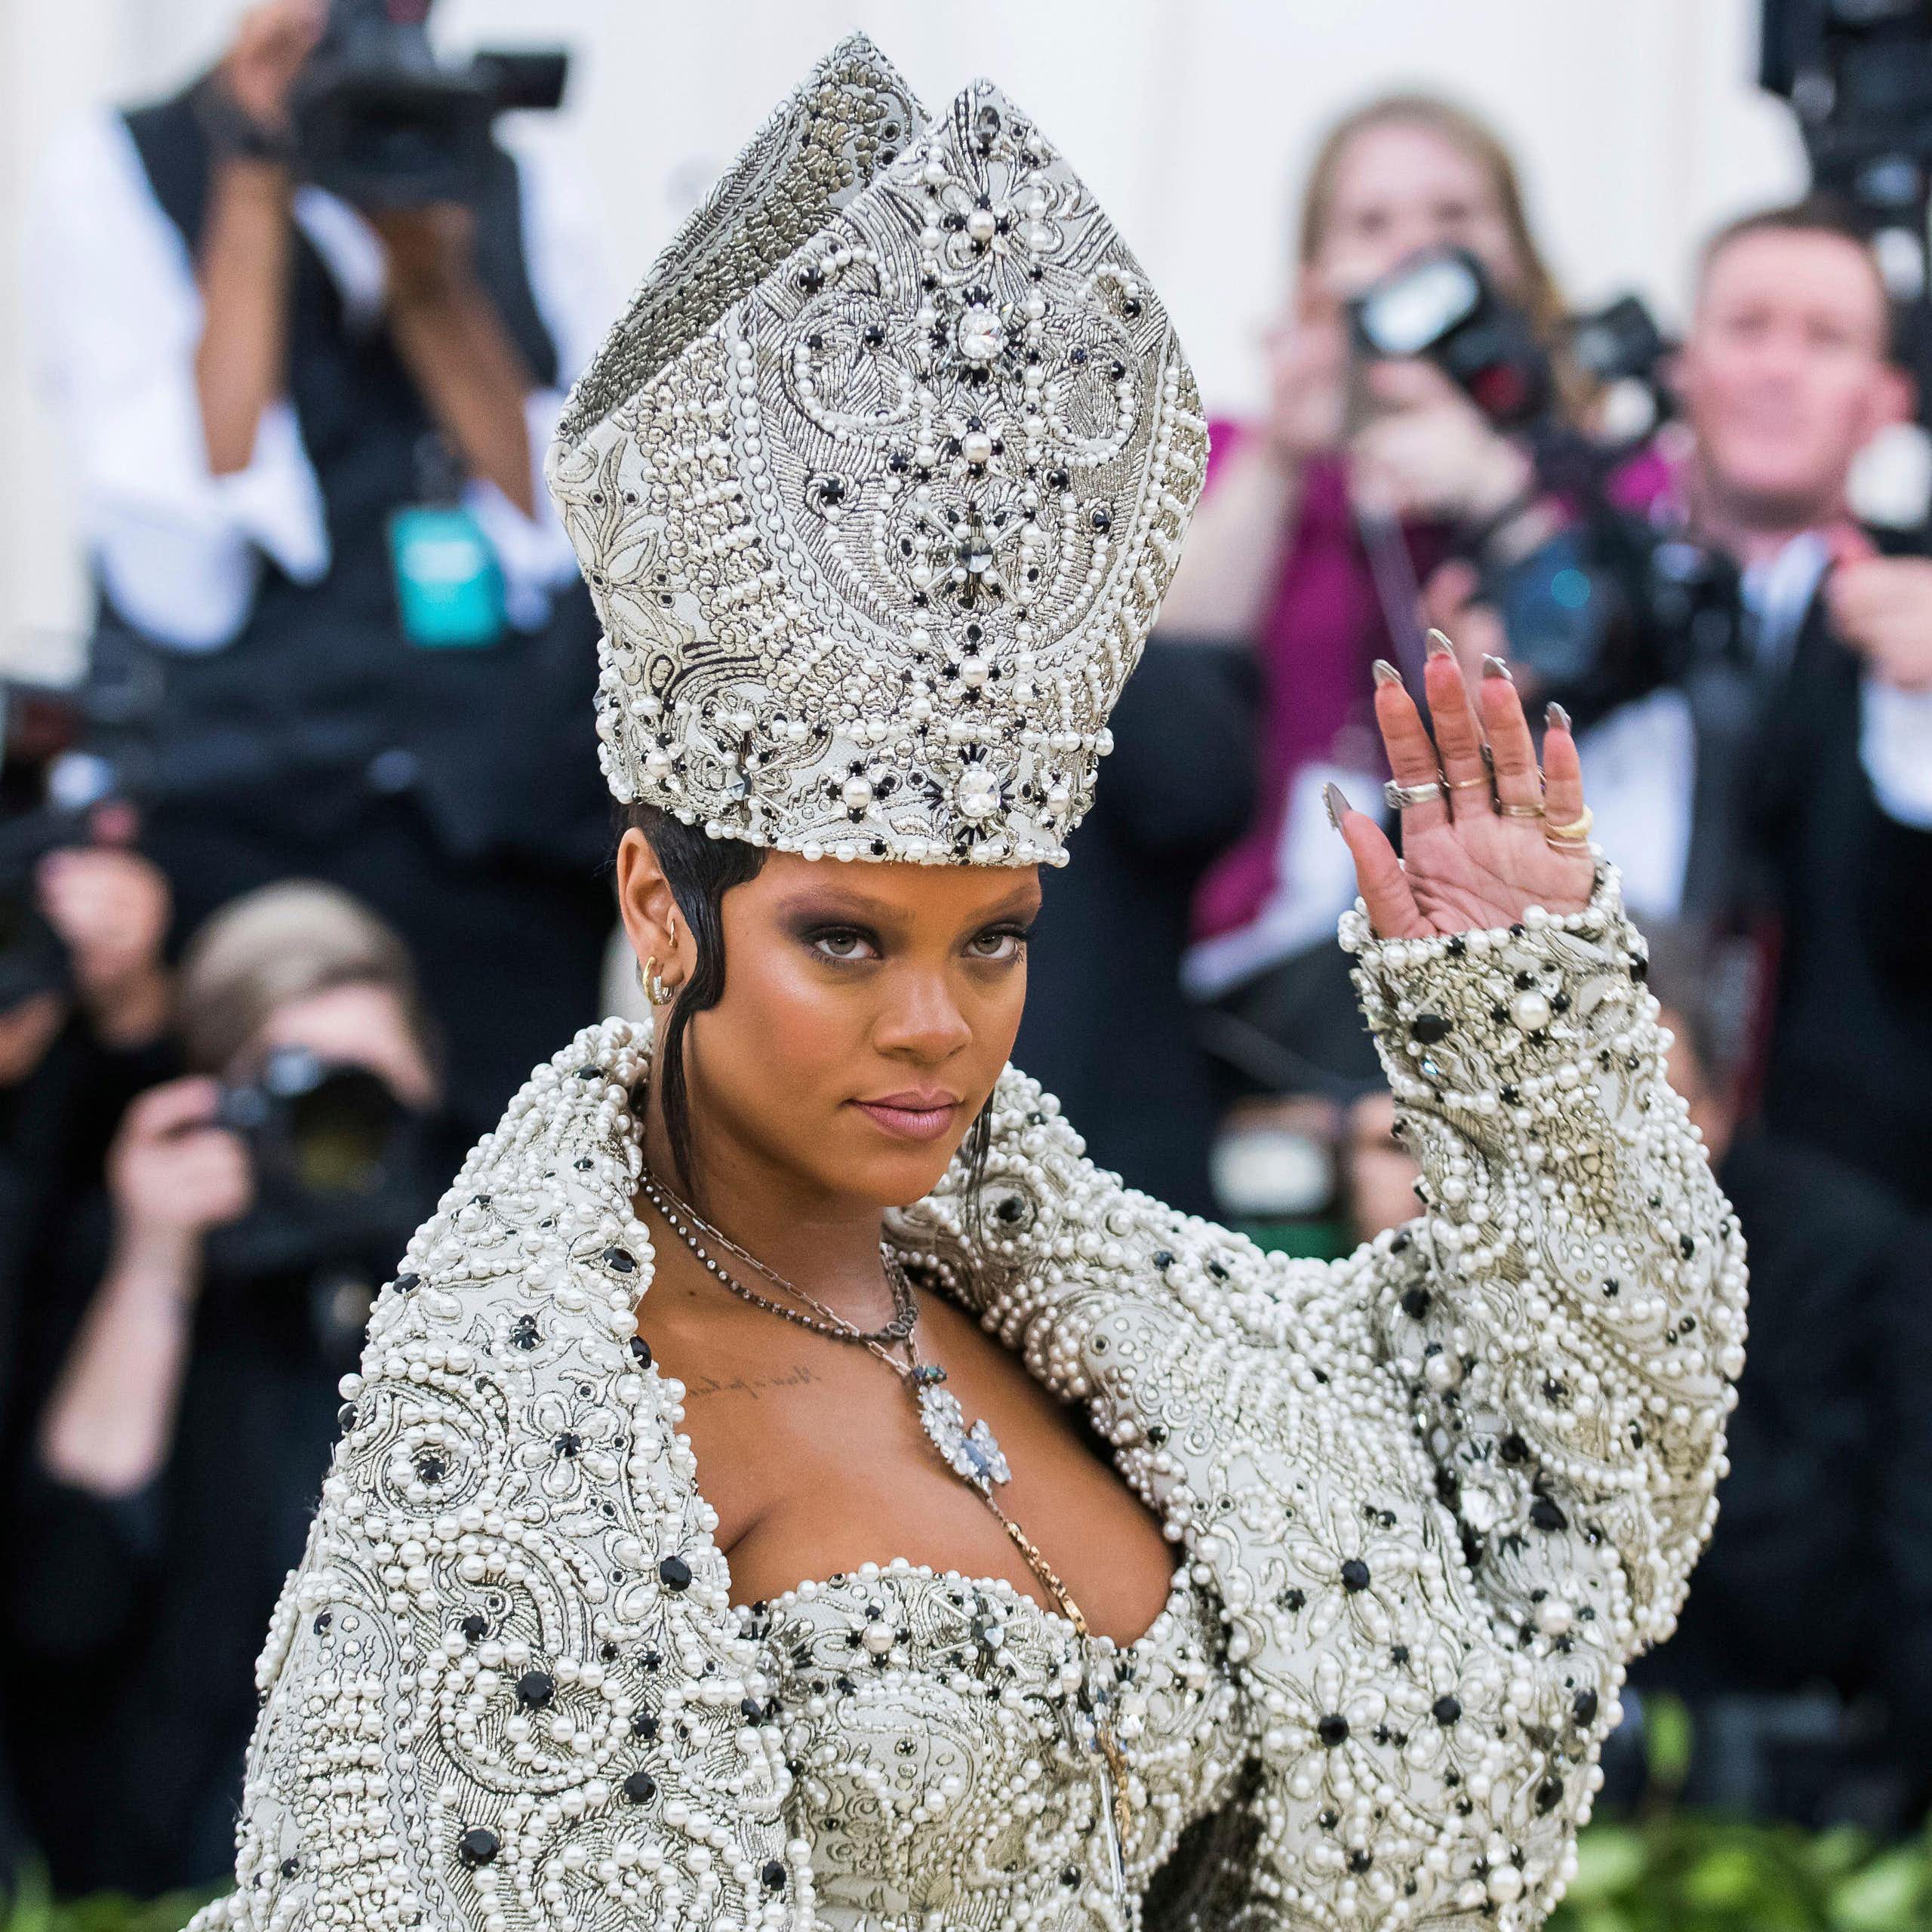 Rihanna’s religious imagery is a protest against feminine ideals of respectability and decency